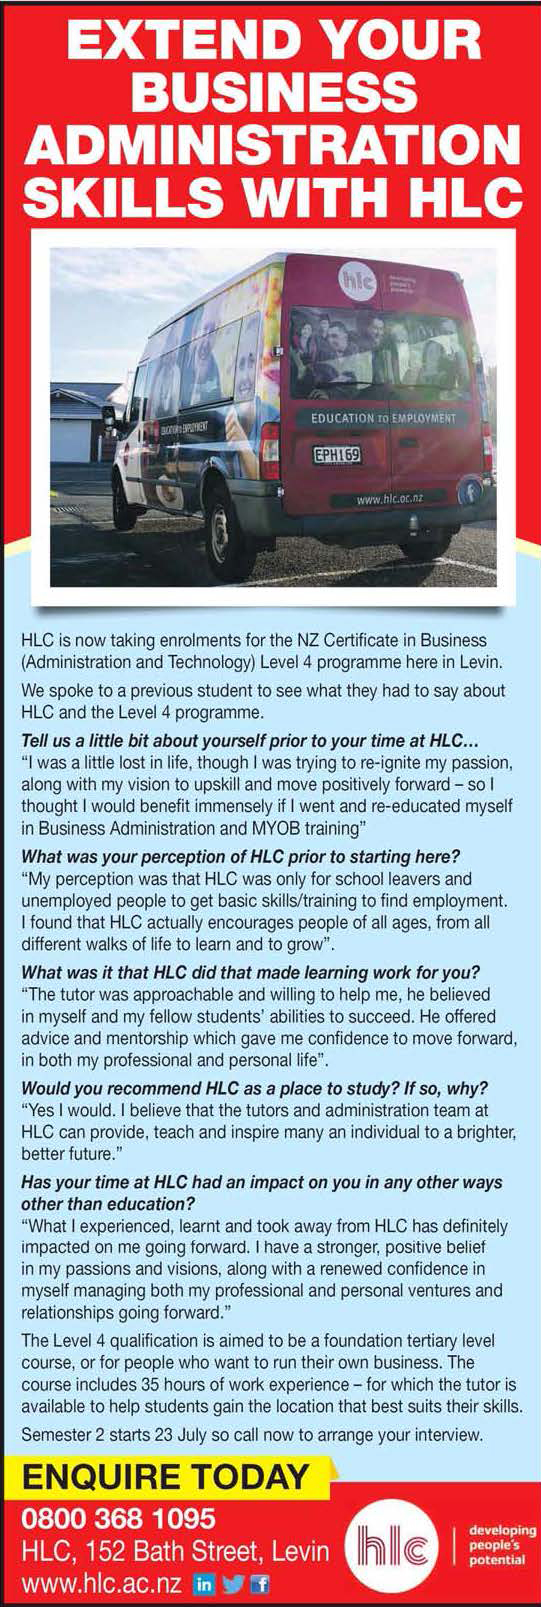 Extend your business administration skills with HLC